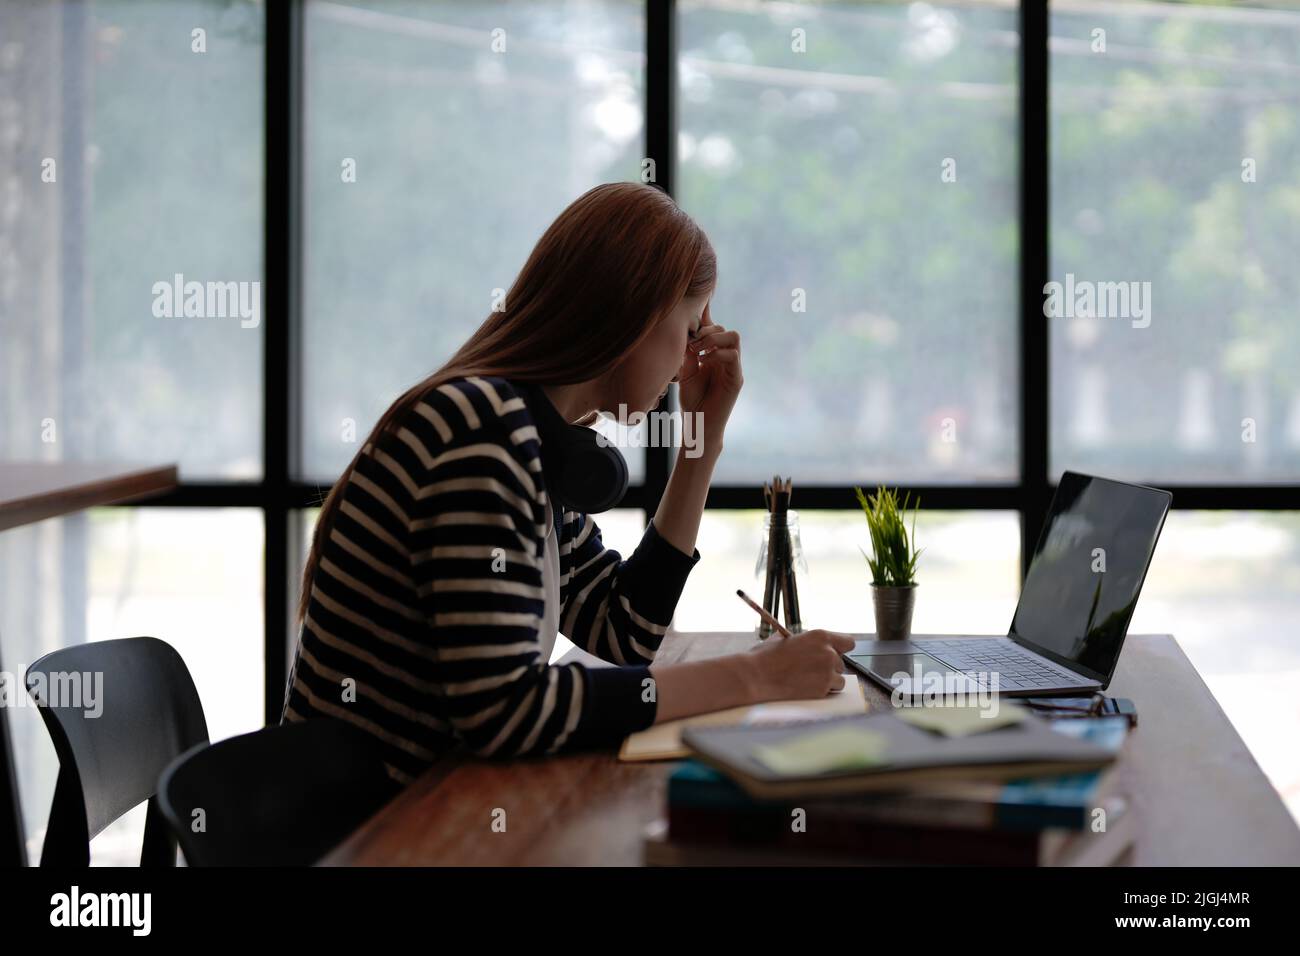 Stressed Asian woman cover her face with hand and feel upset from work in front of laptop computer on desk at office,Stress office lifestyle concept. Stock Photo